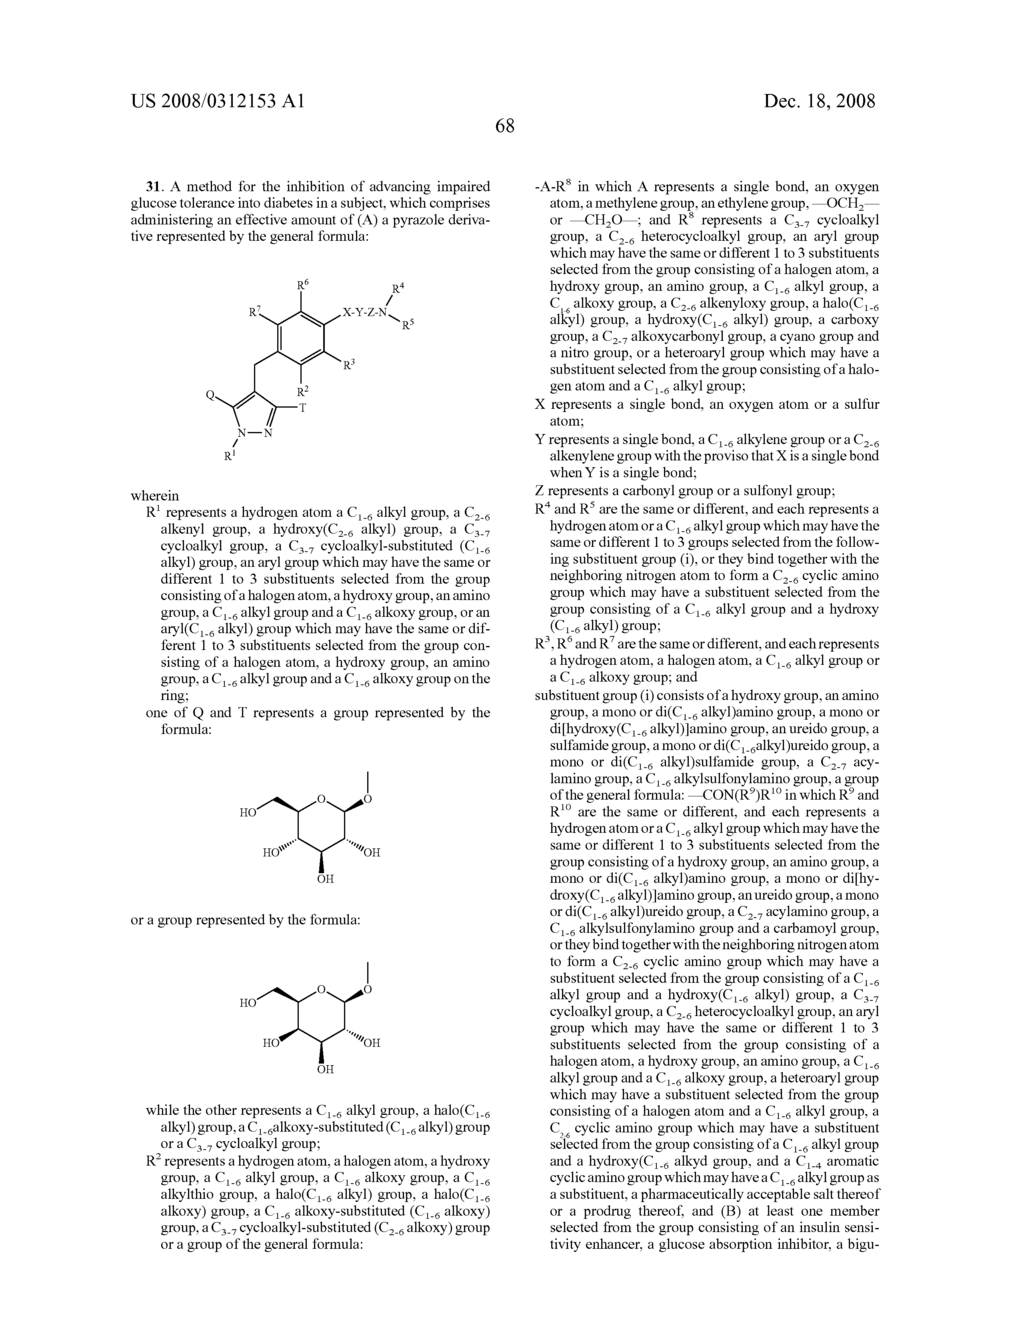 PYRAZOLE DERIVATIVE, MEDICINAL COMPOSITION CONTAINING THE SAME, MEDICINAL USE THEREOF, AND INTERMEDIATE FOR PRODUCTION THEREOF - diagram, schematic, and image 69